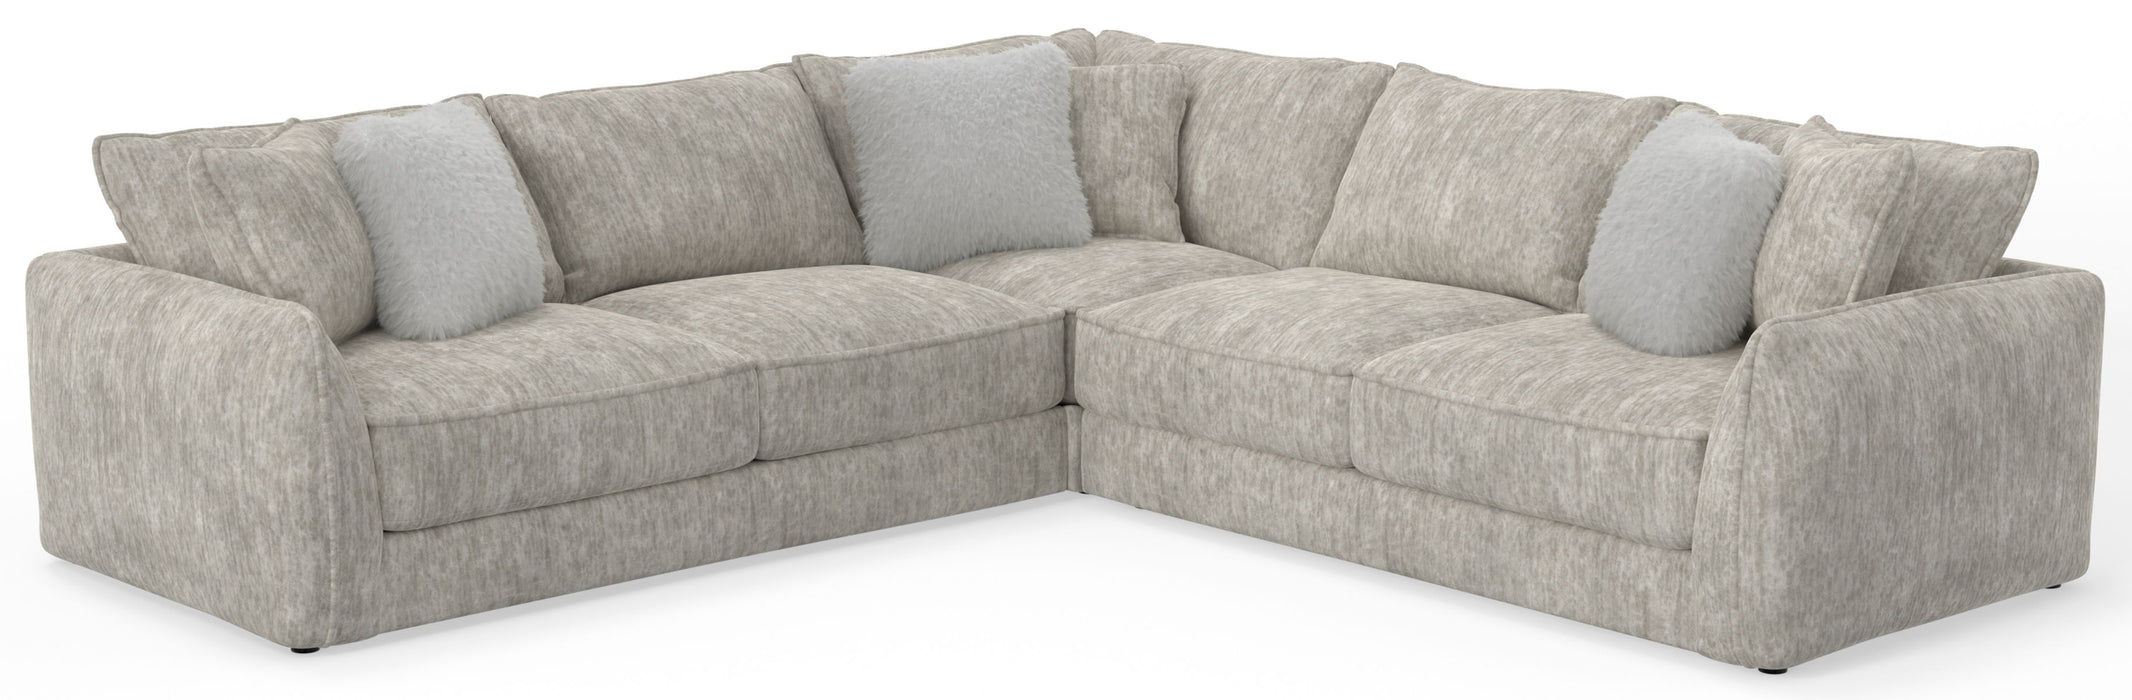 Bucktown - 3 Piece Sectional With Extra Thick Cuddler Seat Cushions - Parchment